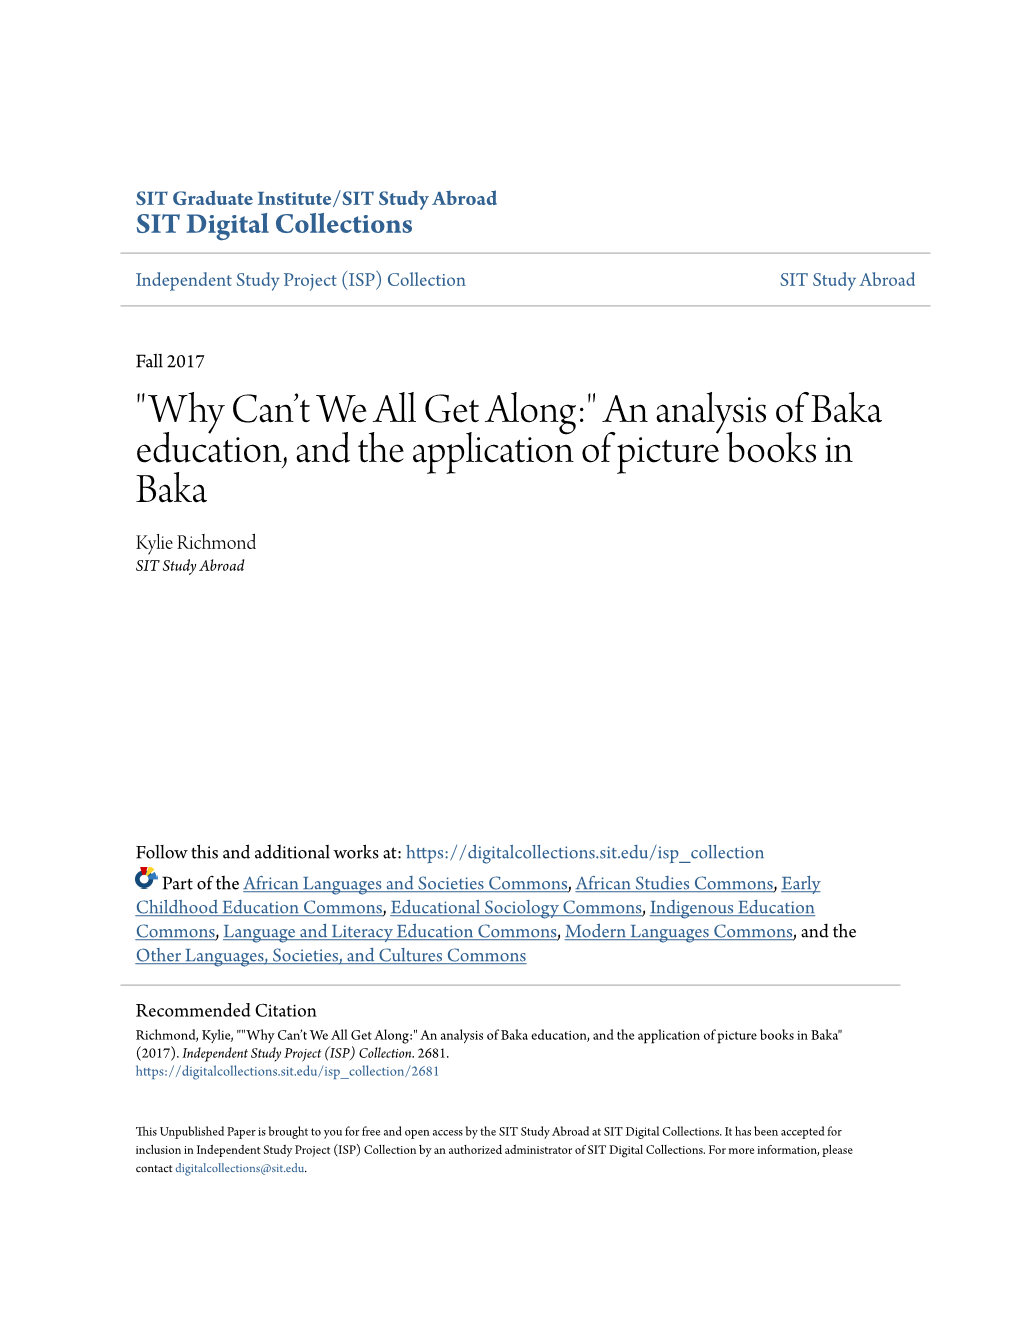 An Analysis of Baka Education, and the Application of Picture Books in Baka Kylie Richmond SIT Study Abroad